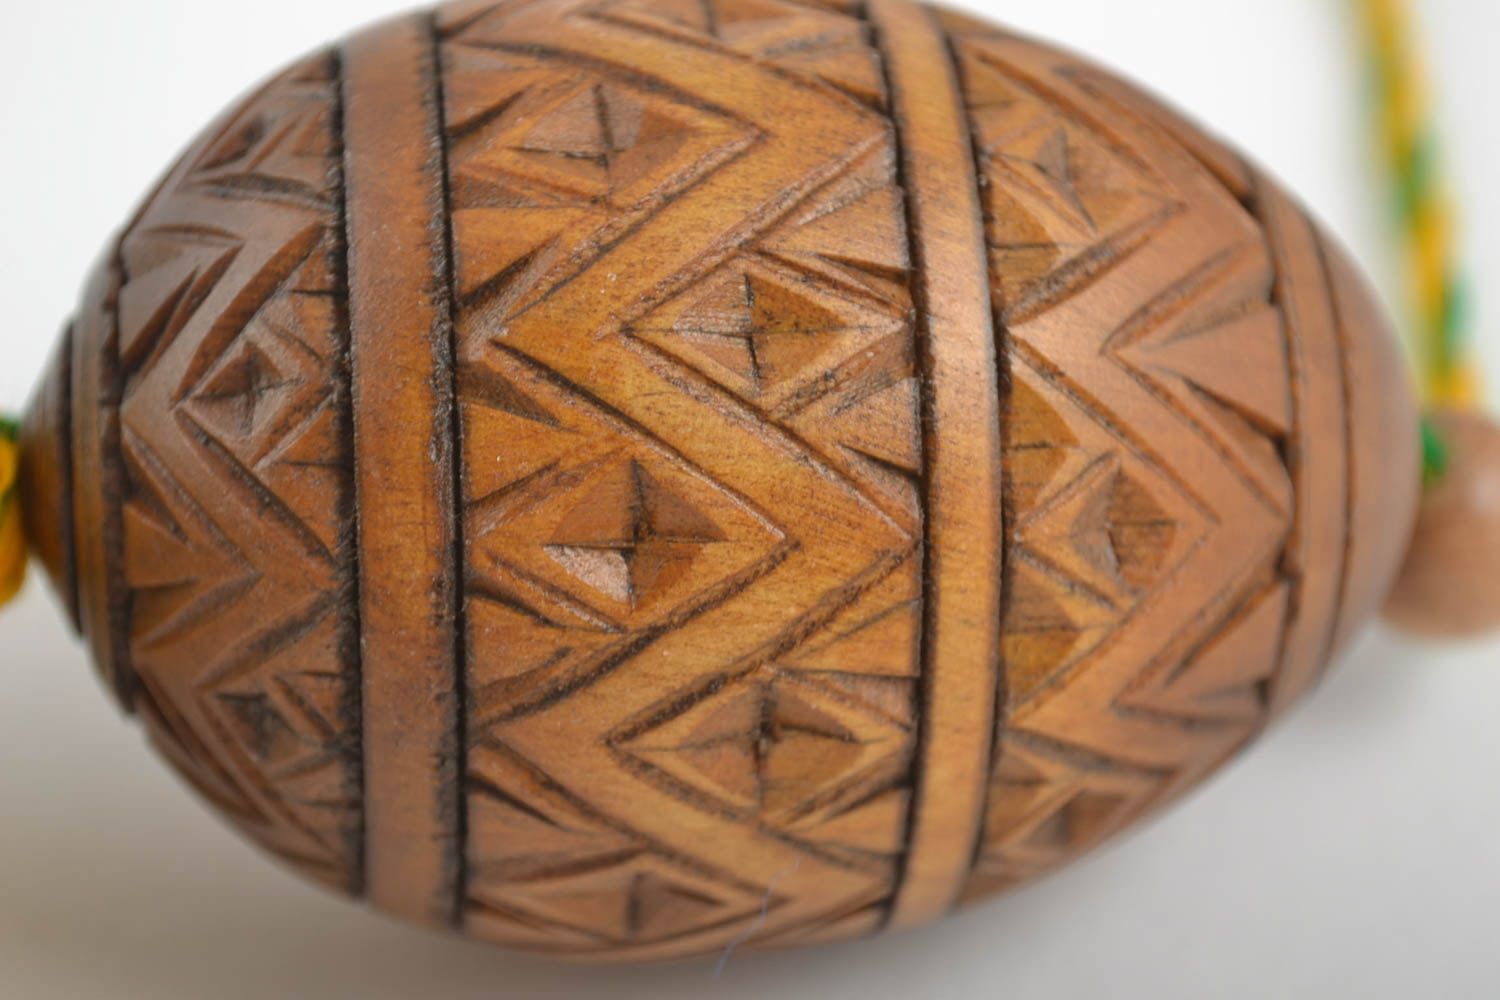 Handmade wooden eggs wood decor 3 decorative eggs wooden wall decor Easter gifts photo 4